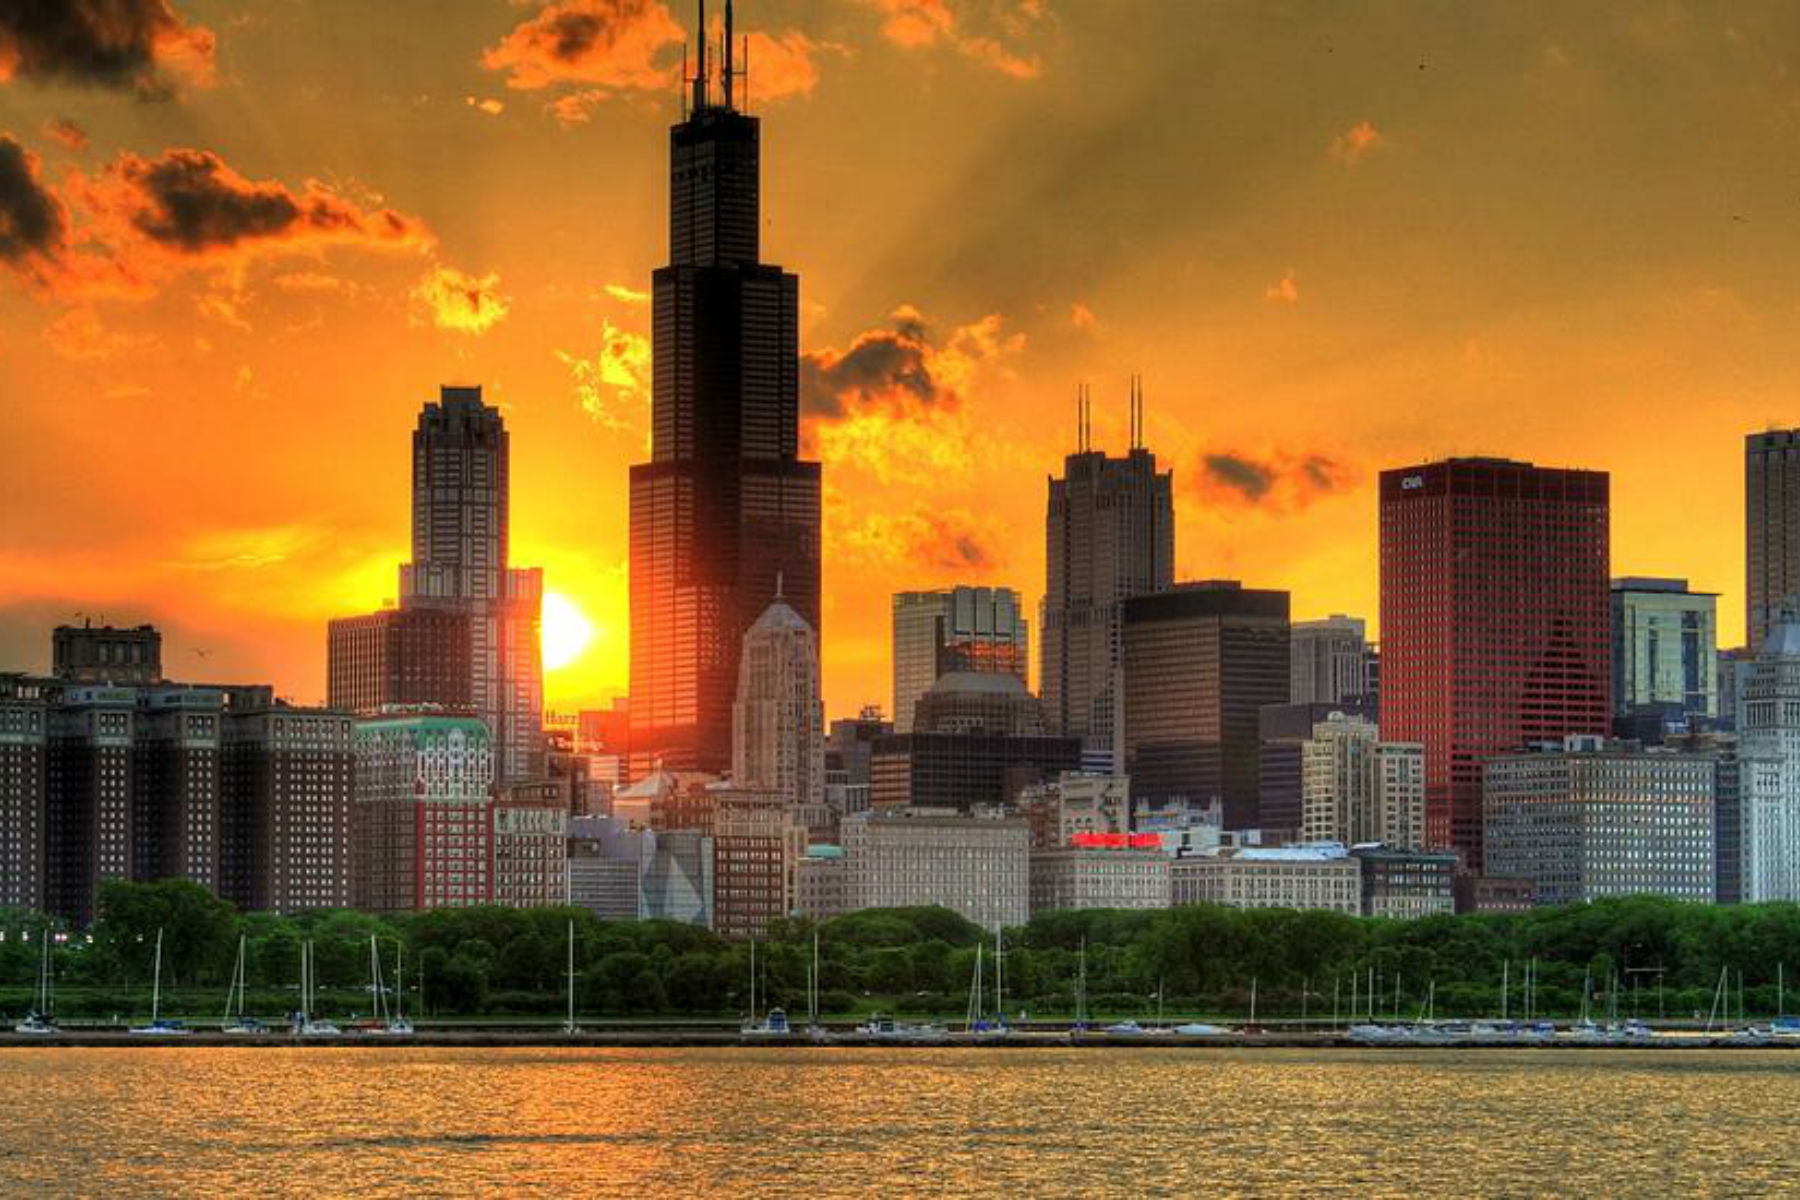 Scott “The Cow Guy” Shellady Warns Chicago is Headed for a Bigger Collapse than We Think